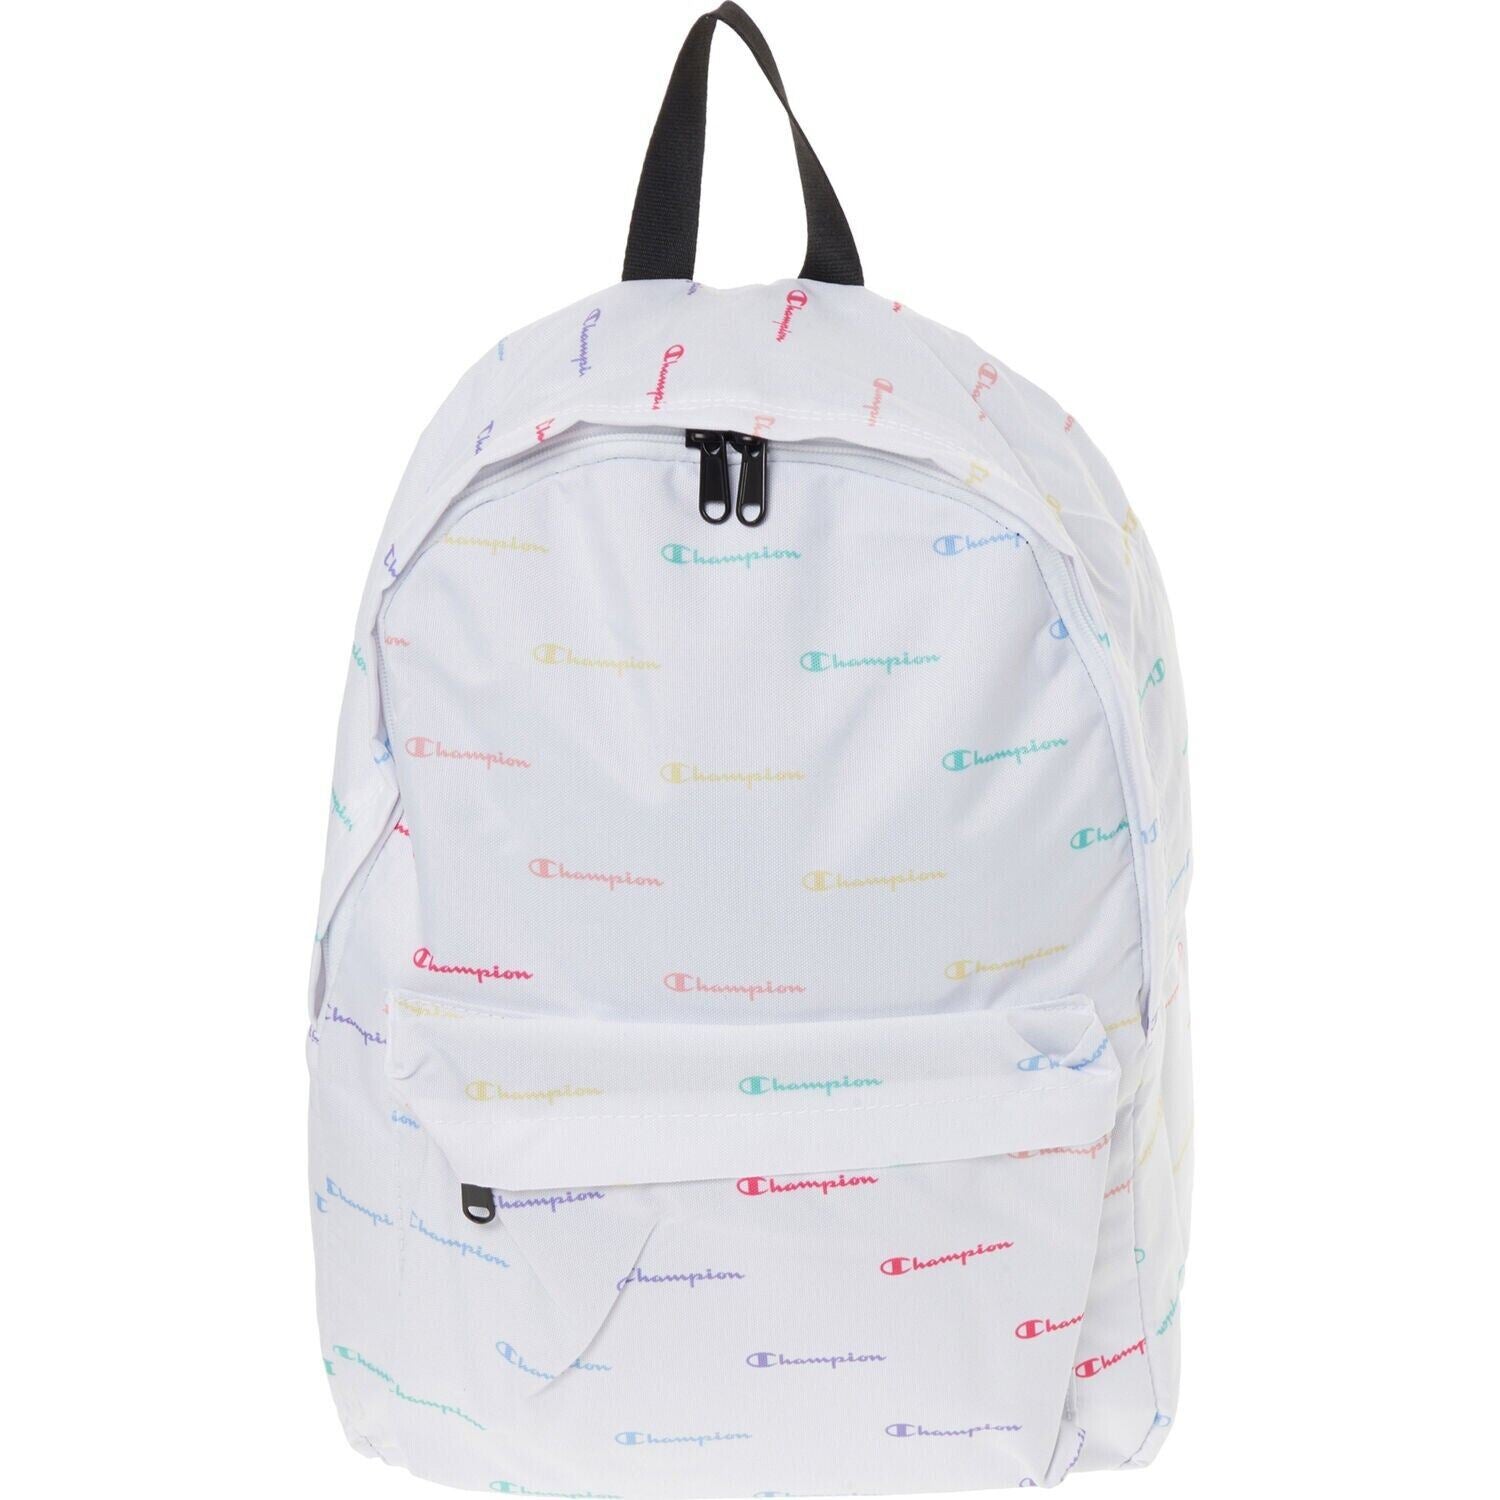 CHAMPION School/Travel Backpack, with Laptop Sleeve, Off-white/Multicoloured